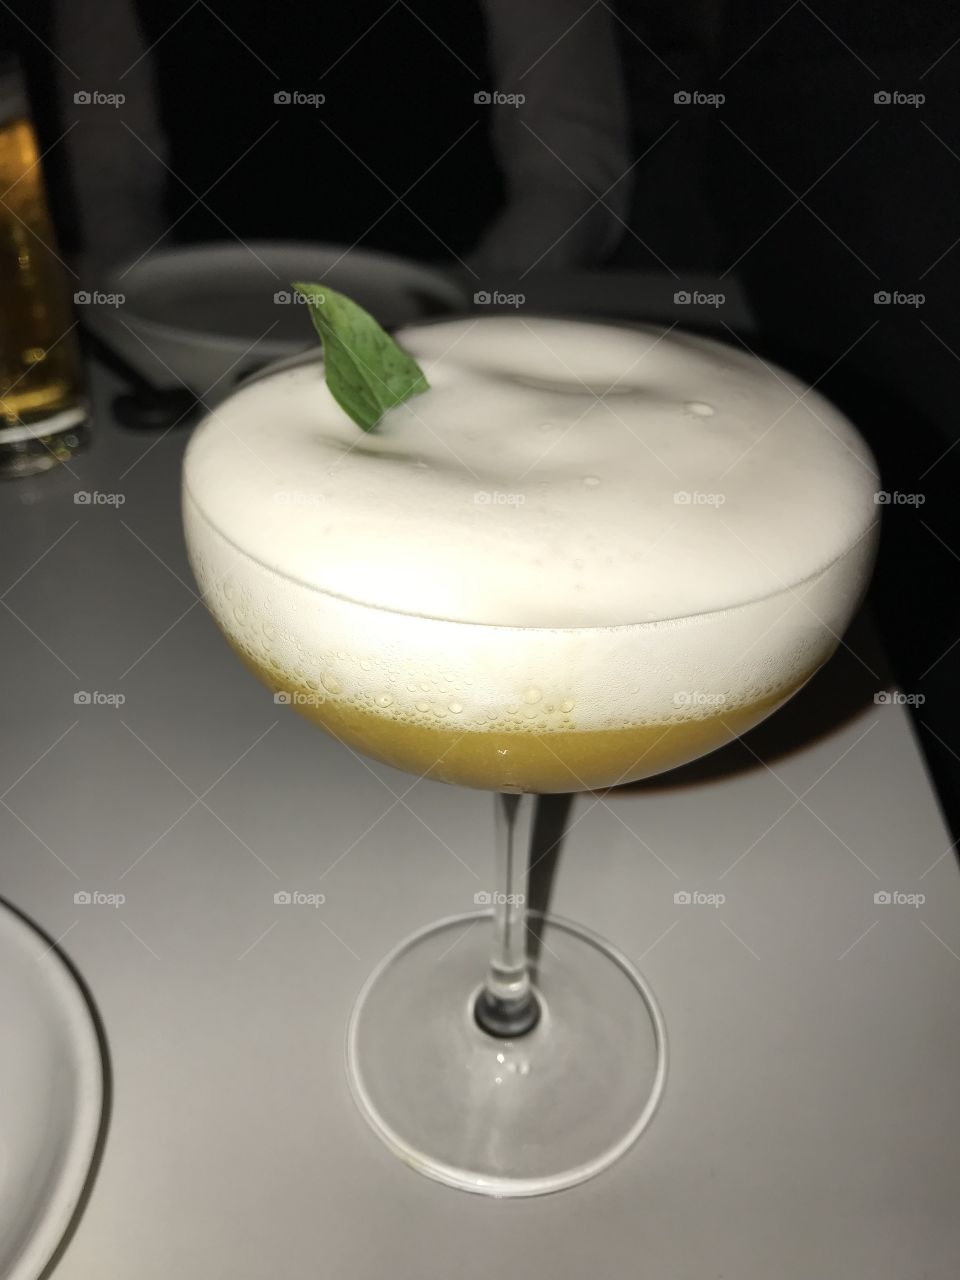 I love having a delicious beverage with my meals when I’m out for dinner. I had this pineapple infused cocktail at a Japanese restaurant in Toronto, Ontario. 